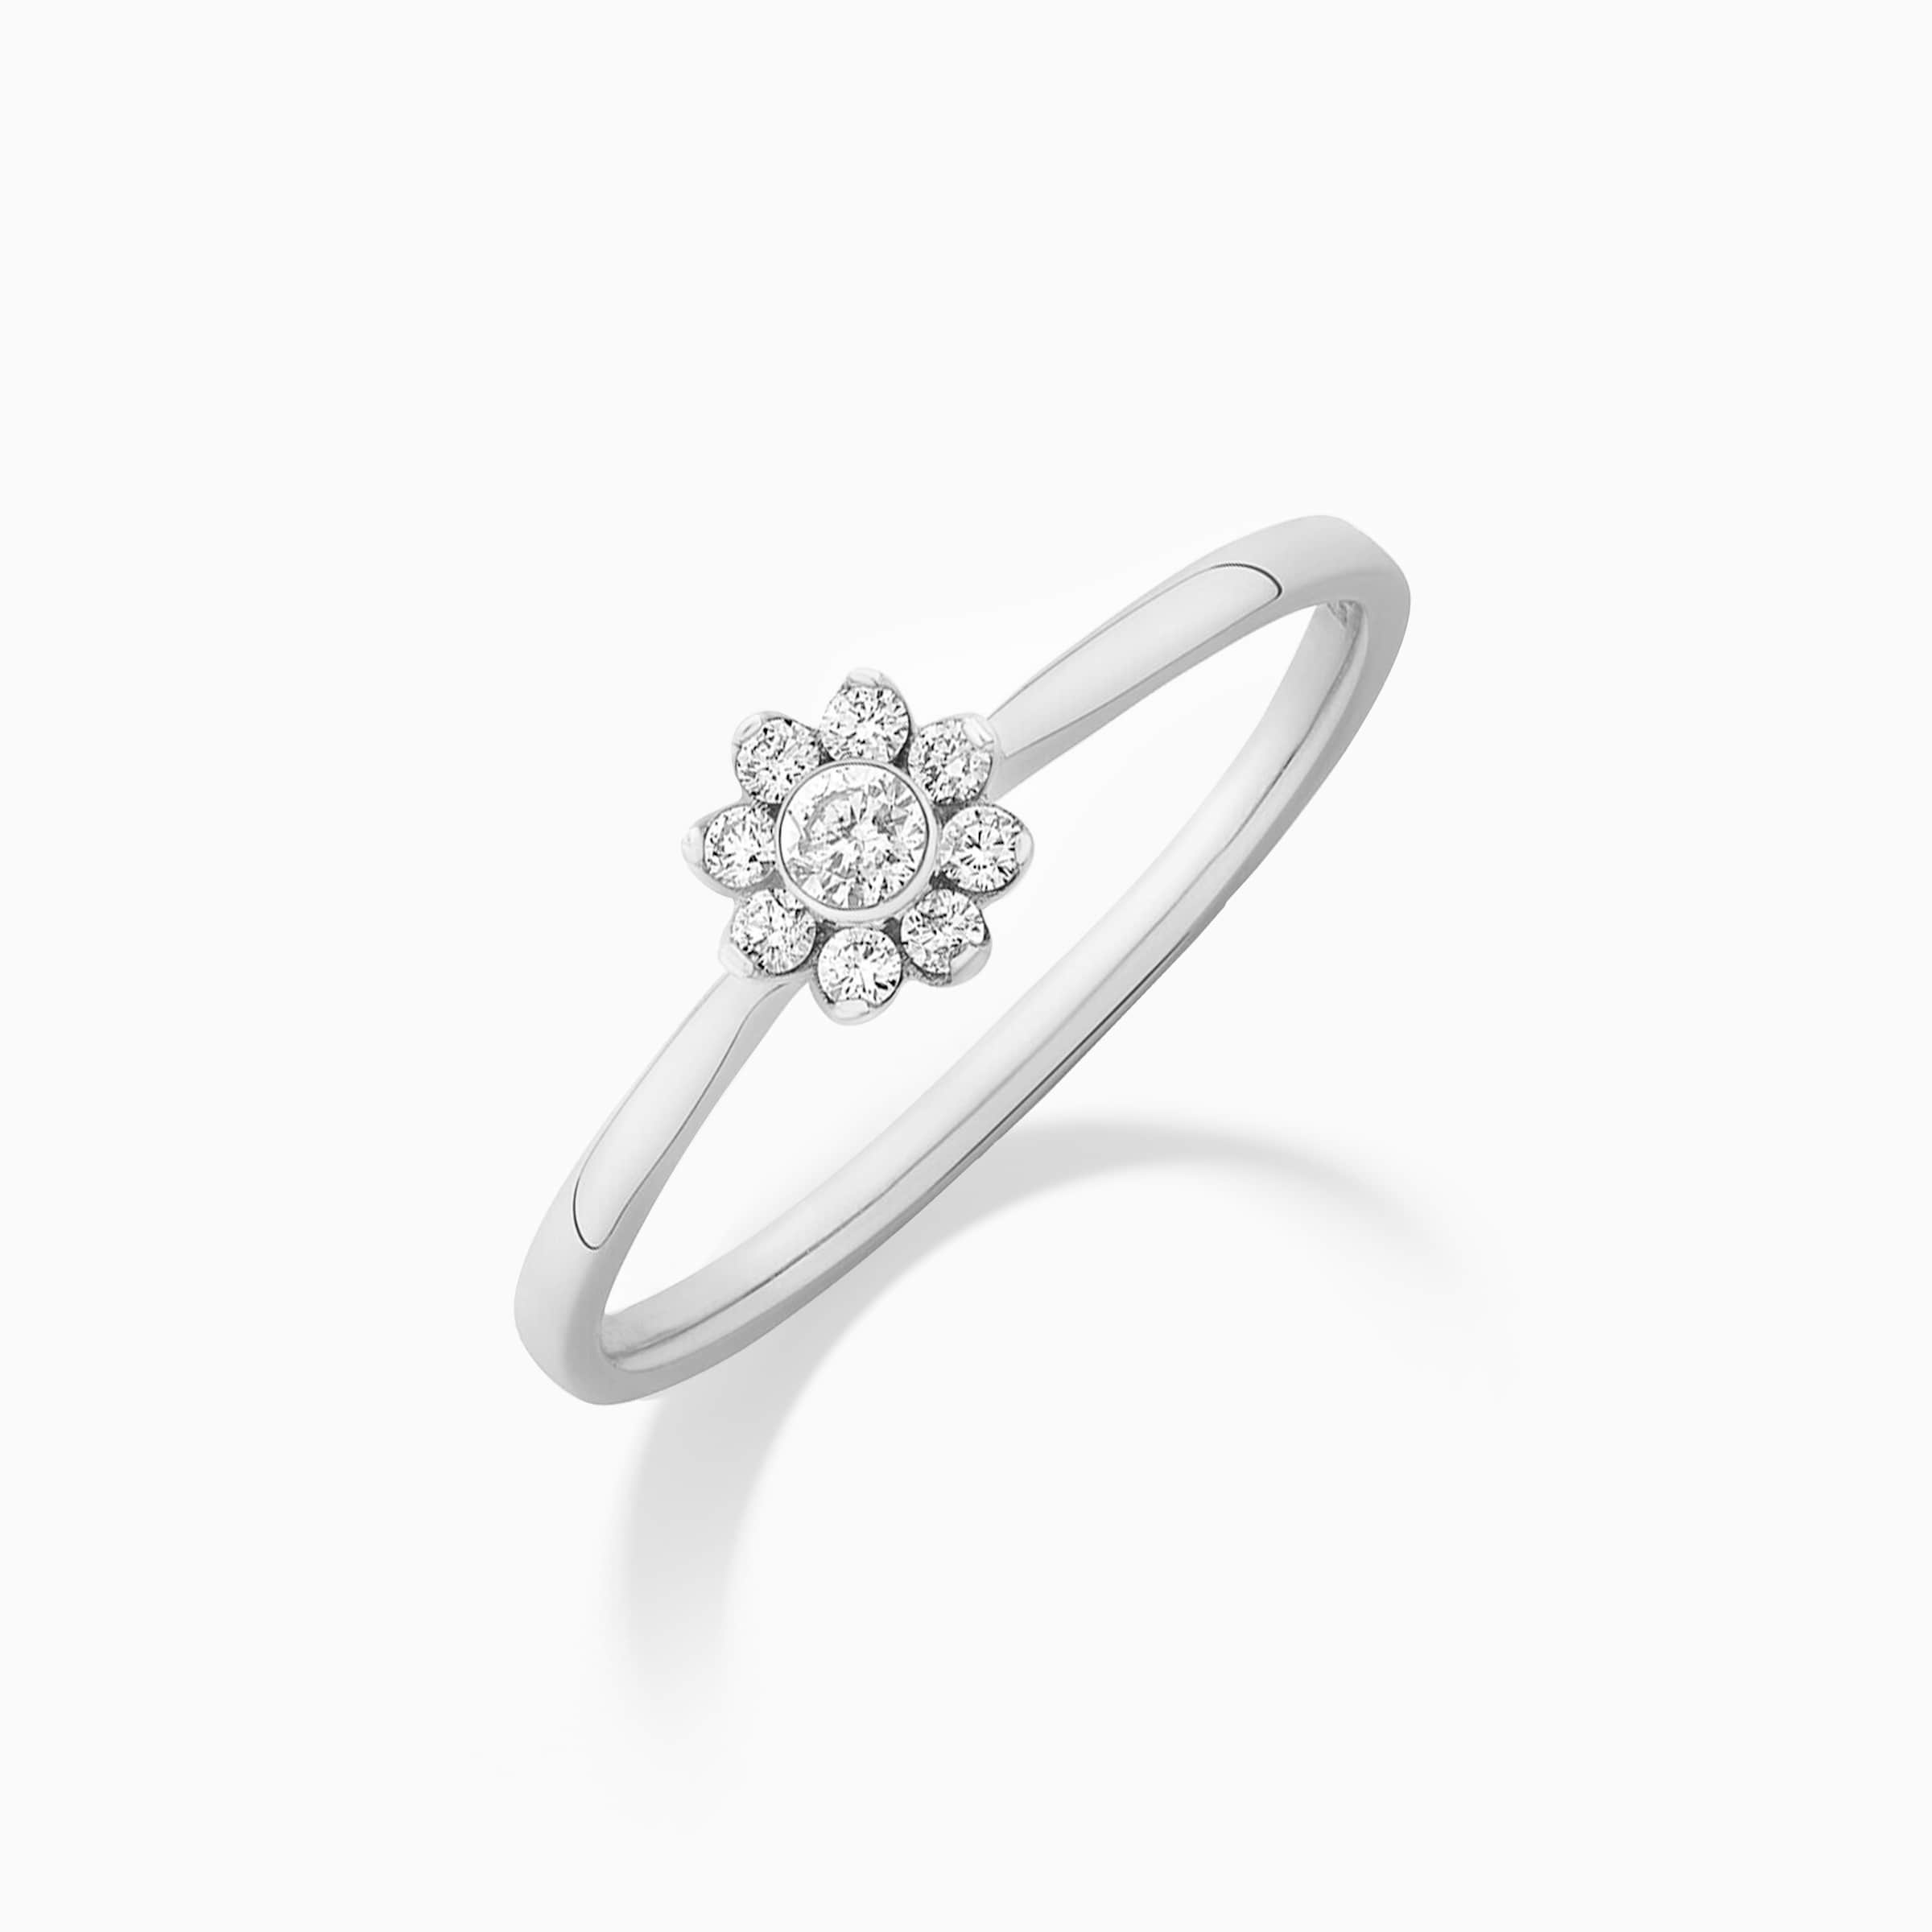 Darry Ring floral halo promise ring in white gold